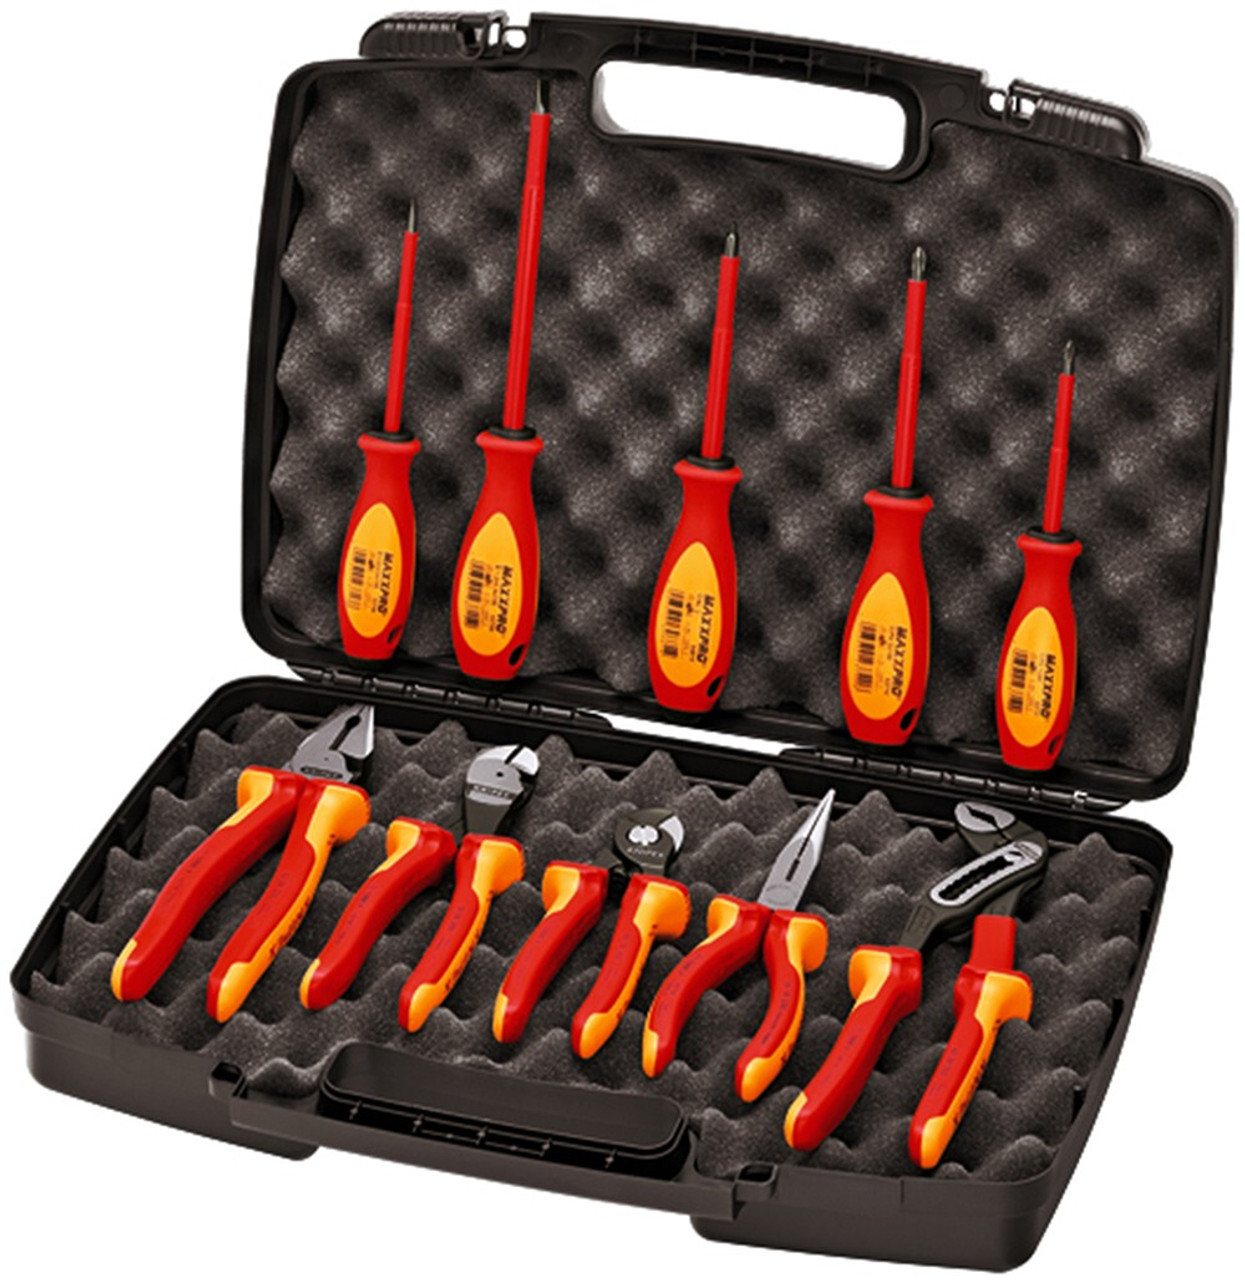 Knipex 10pc Insulated Pliers Screwdriver Electricians Tool Set 1000V  9K989830US - Bowers Tool Co.